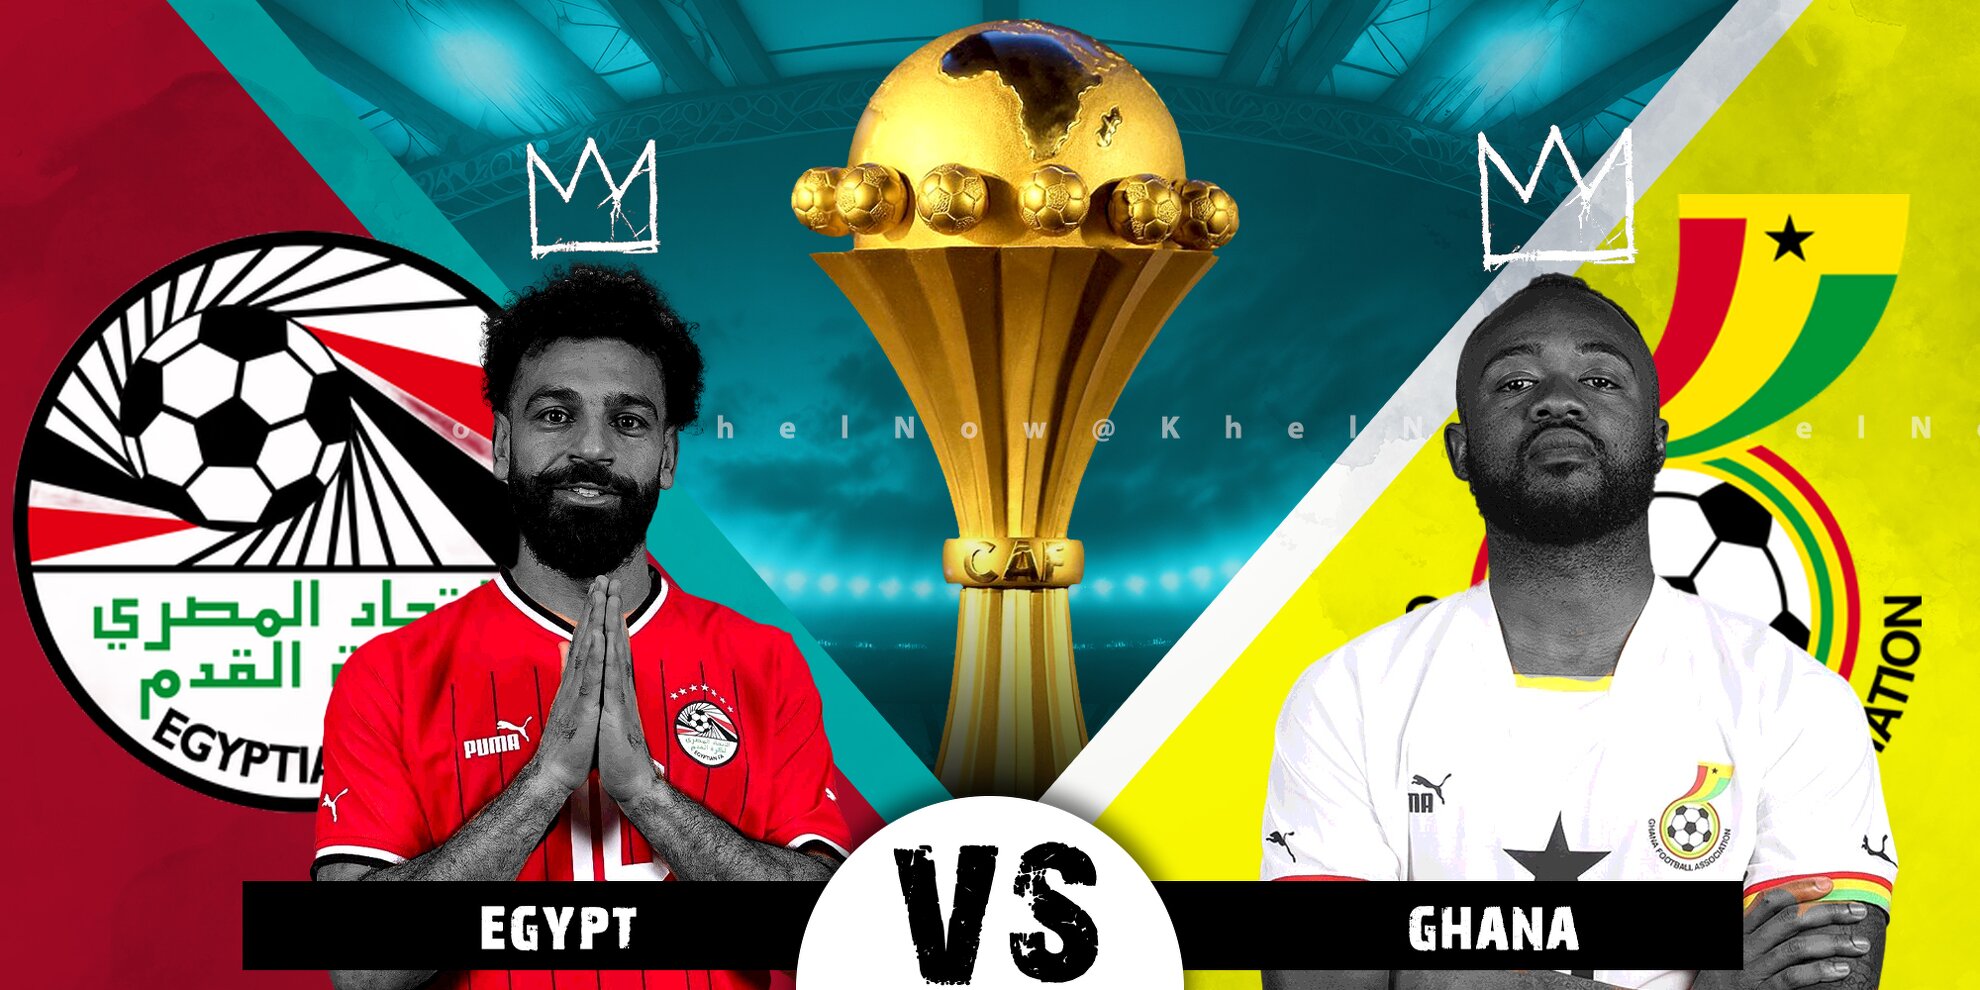 sokapro-AFCON: A battle royal is looming as Egypt prepares to take on fellow continental heavyweights Ghana in what will be a match that will decide the fate of the two footballing giants